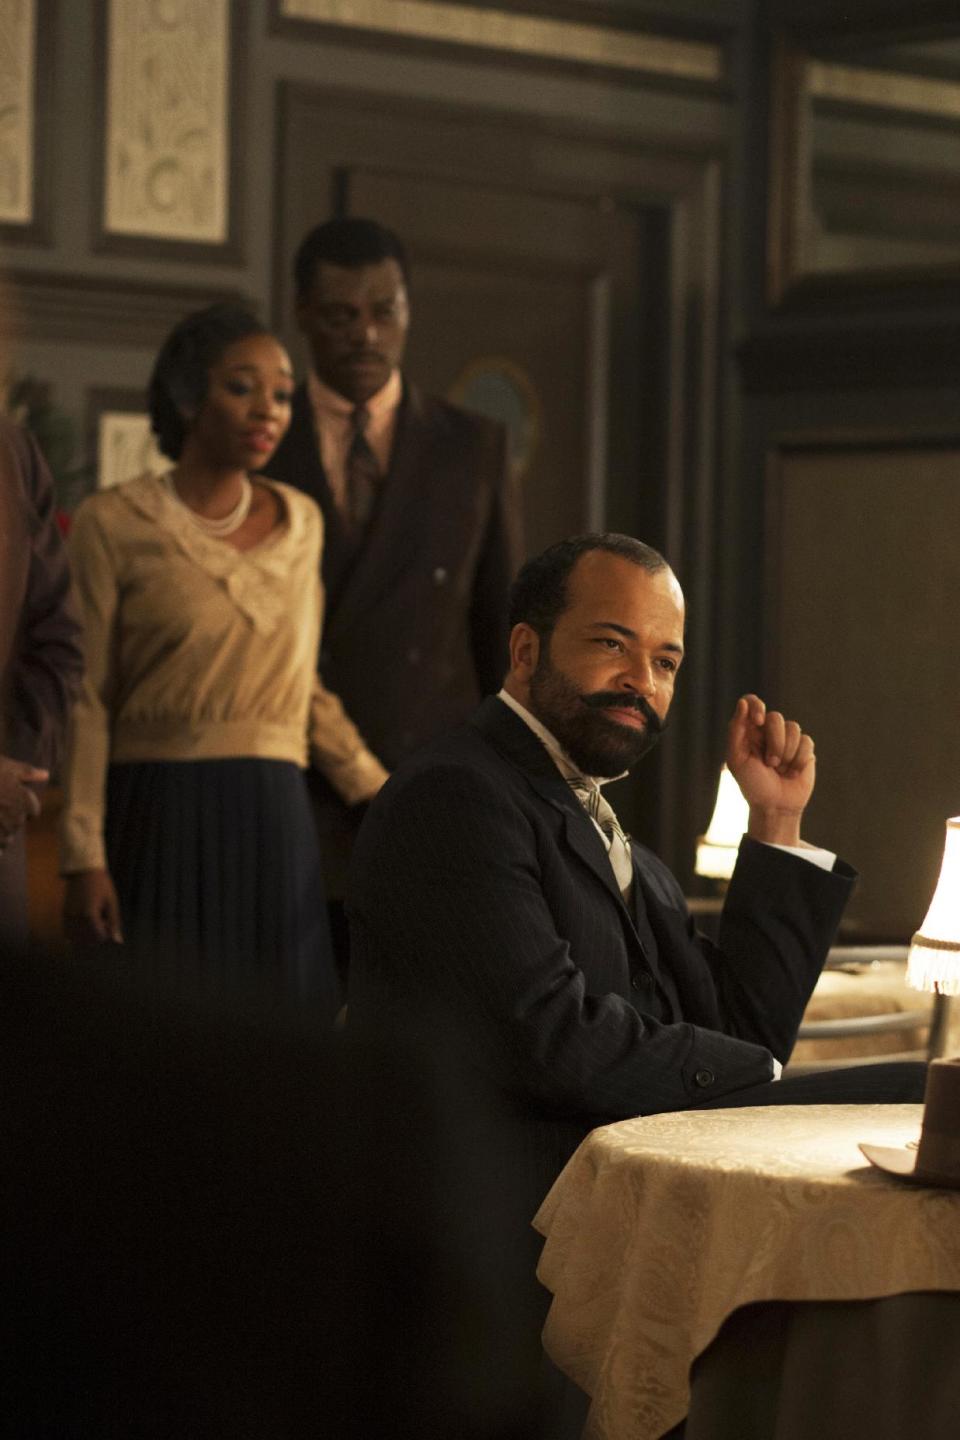 This photo provided by HBO shows, Jeffrey Wright, right, as Dr. Valentine Narcisse, and Christina Jackson, as Maybelle White, left, in a scene from season 4 of HBO's "Boardwalk Empire." (AP Photo/HBO, Paul Schiraldi Photography)